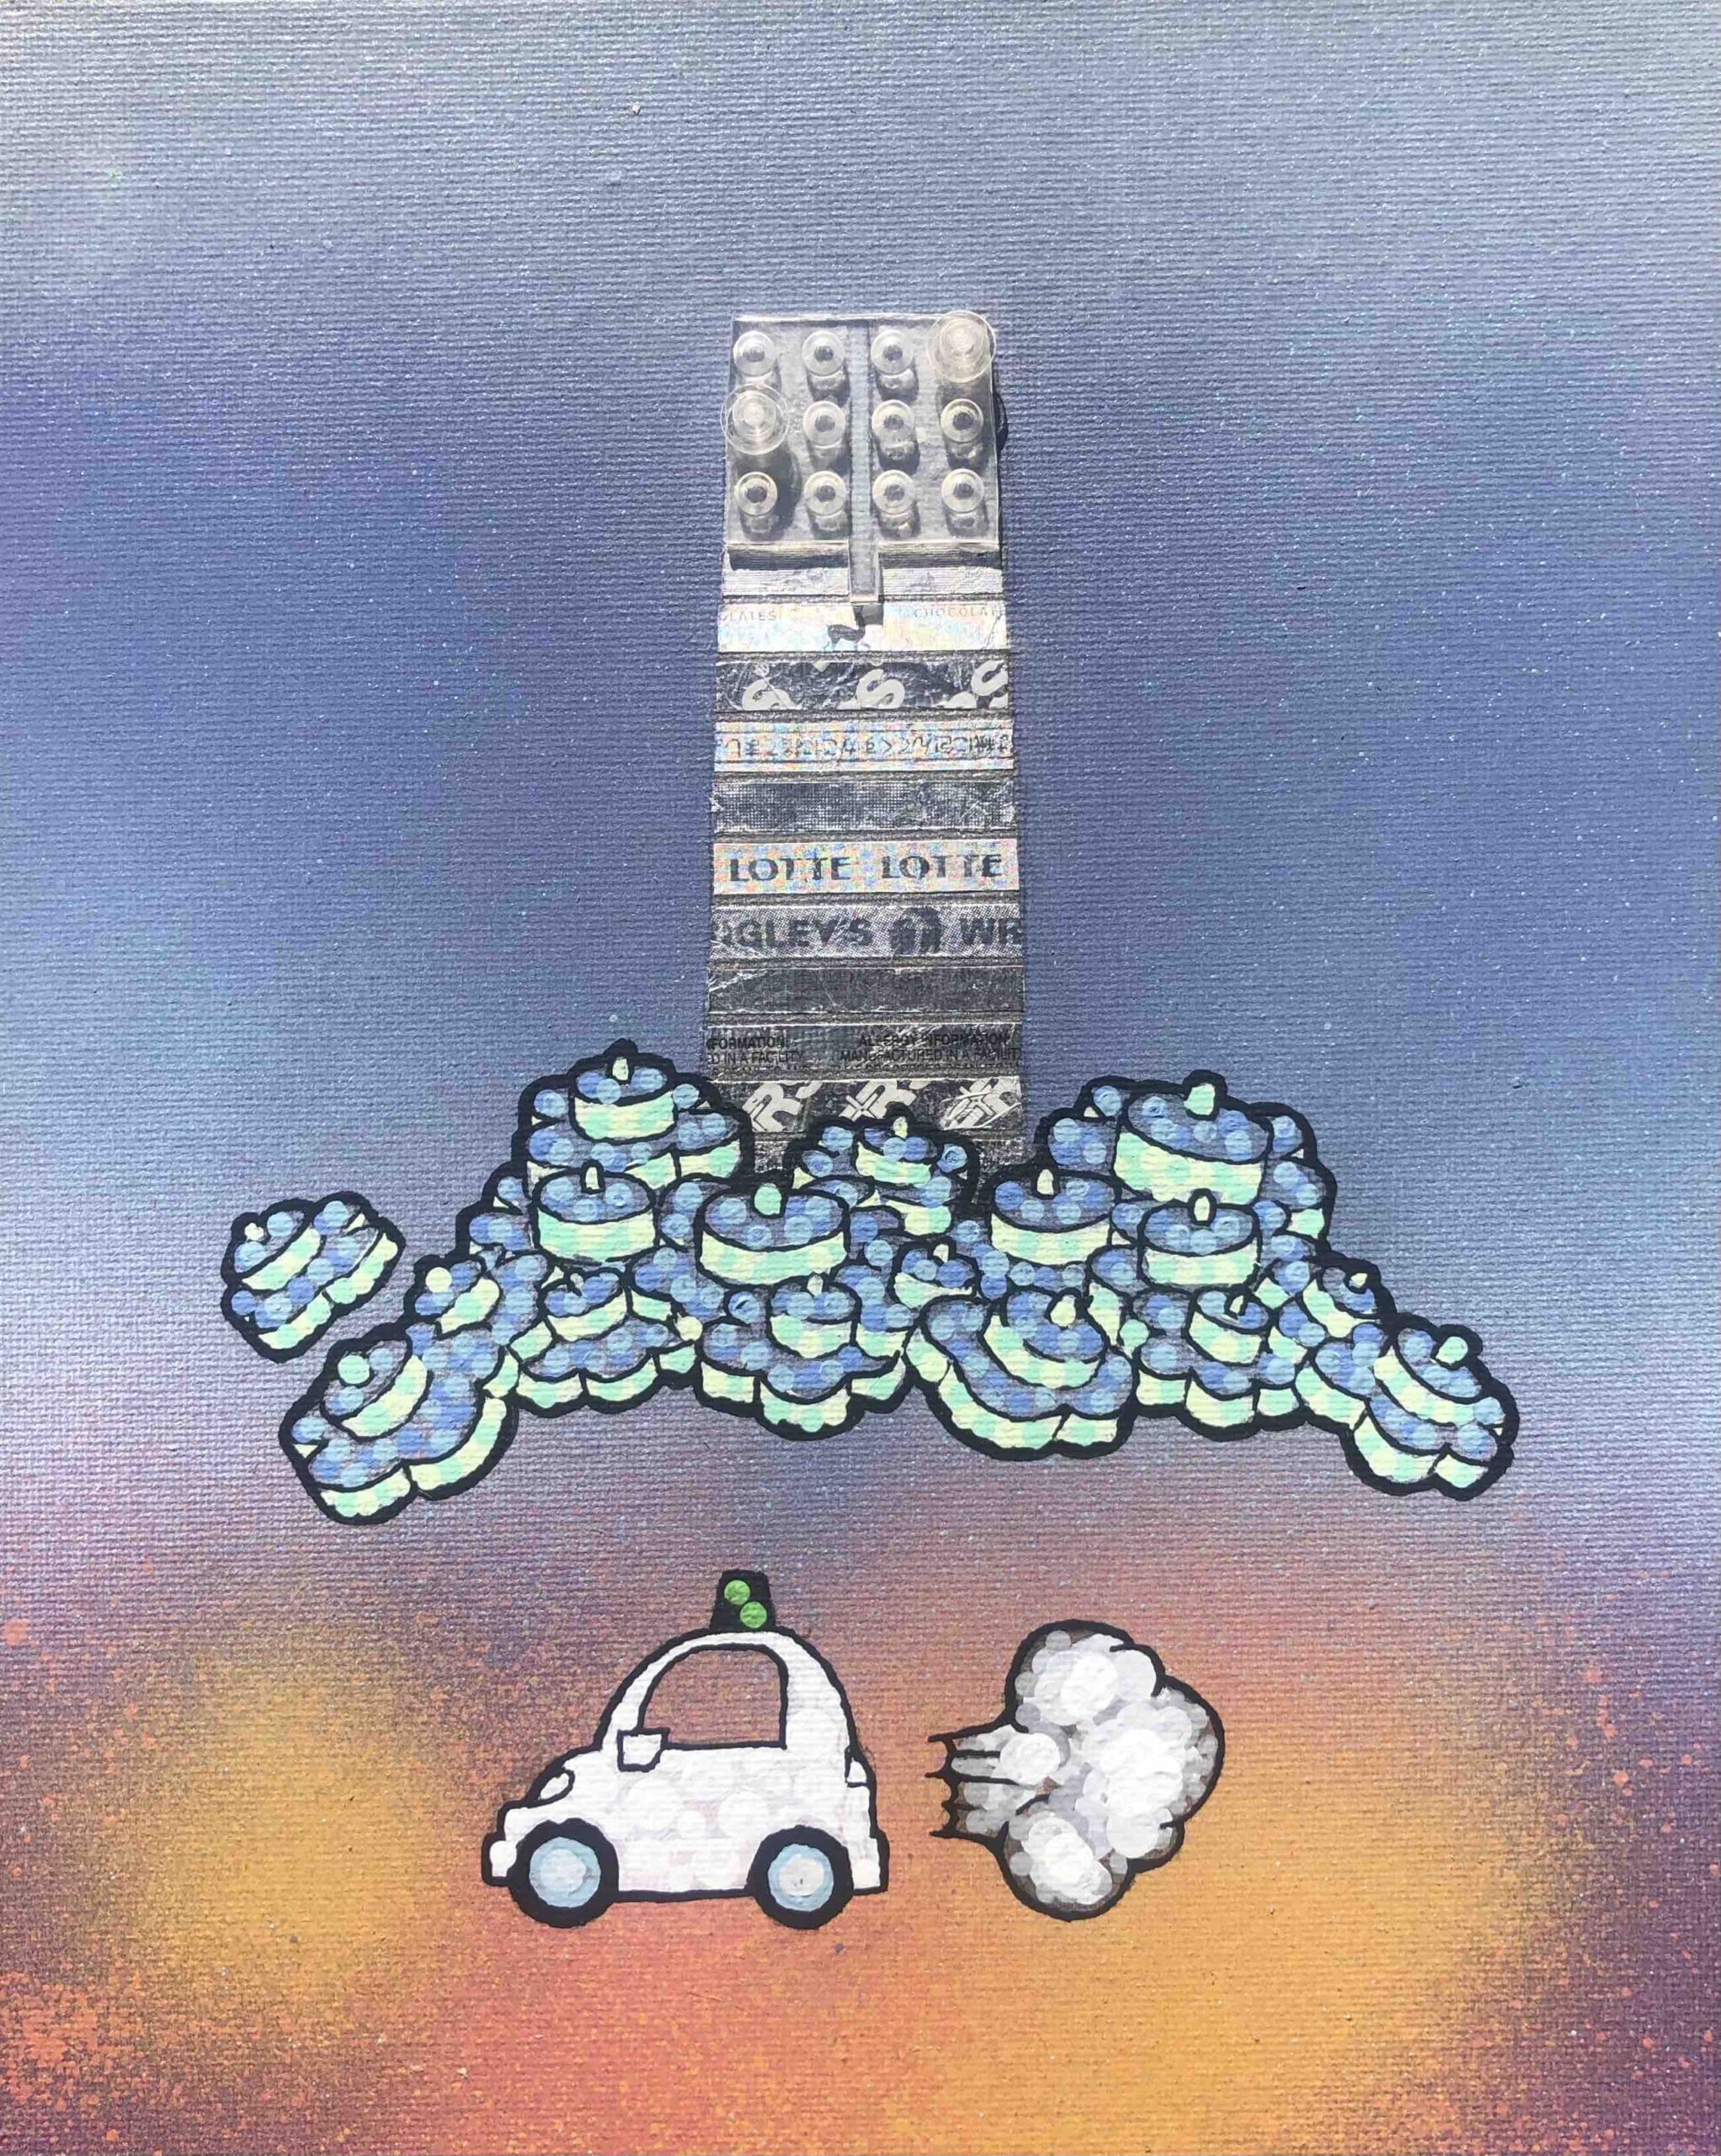 Transbay Tower sitting atop a fog of LEGO flowers hovered above an autonomous car with smoke.